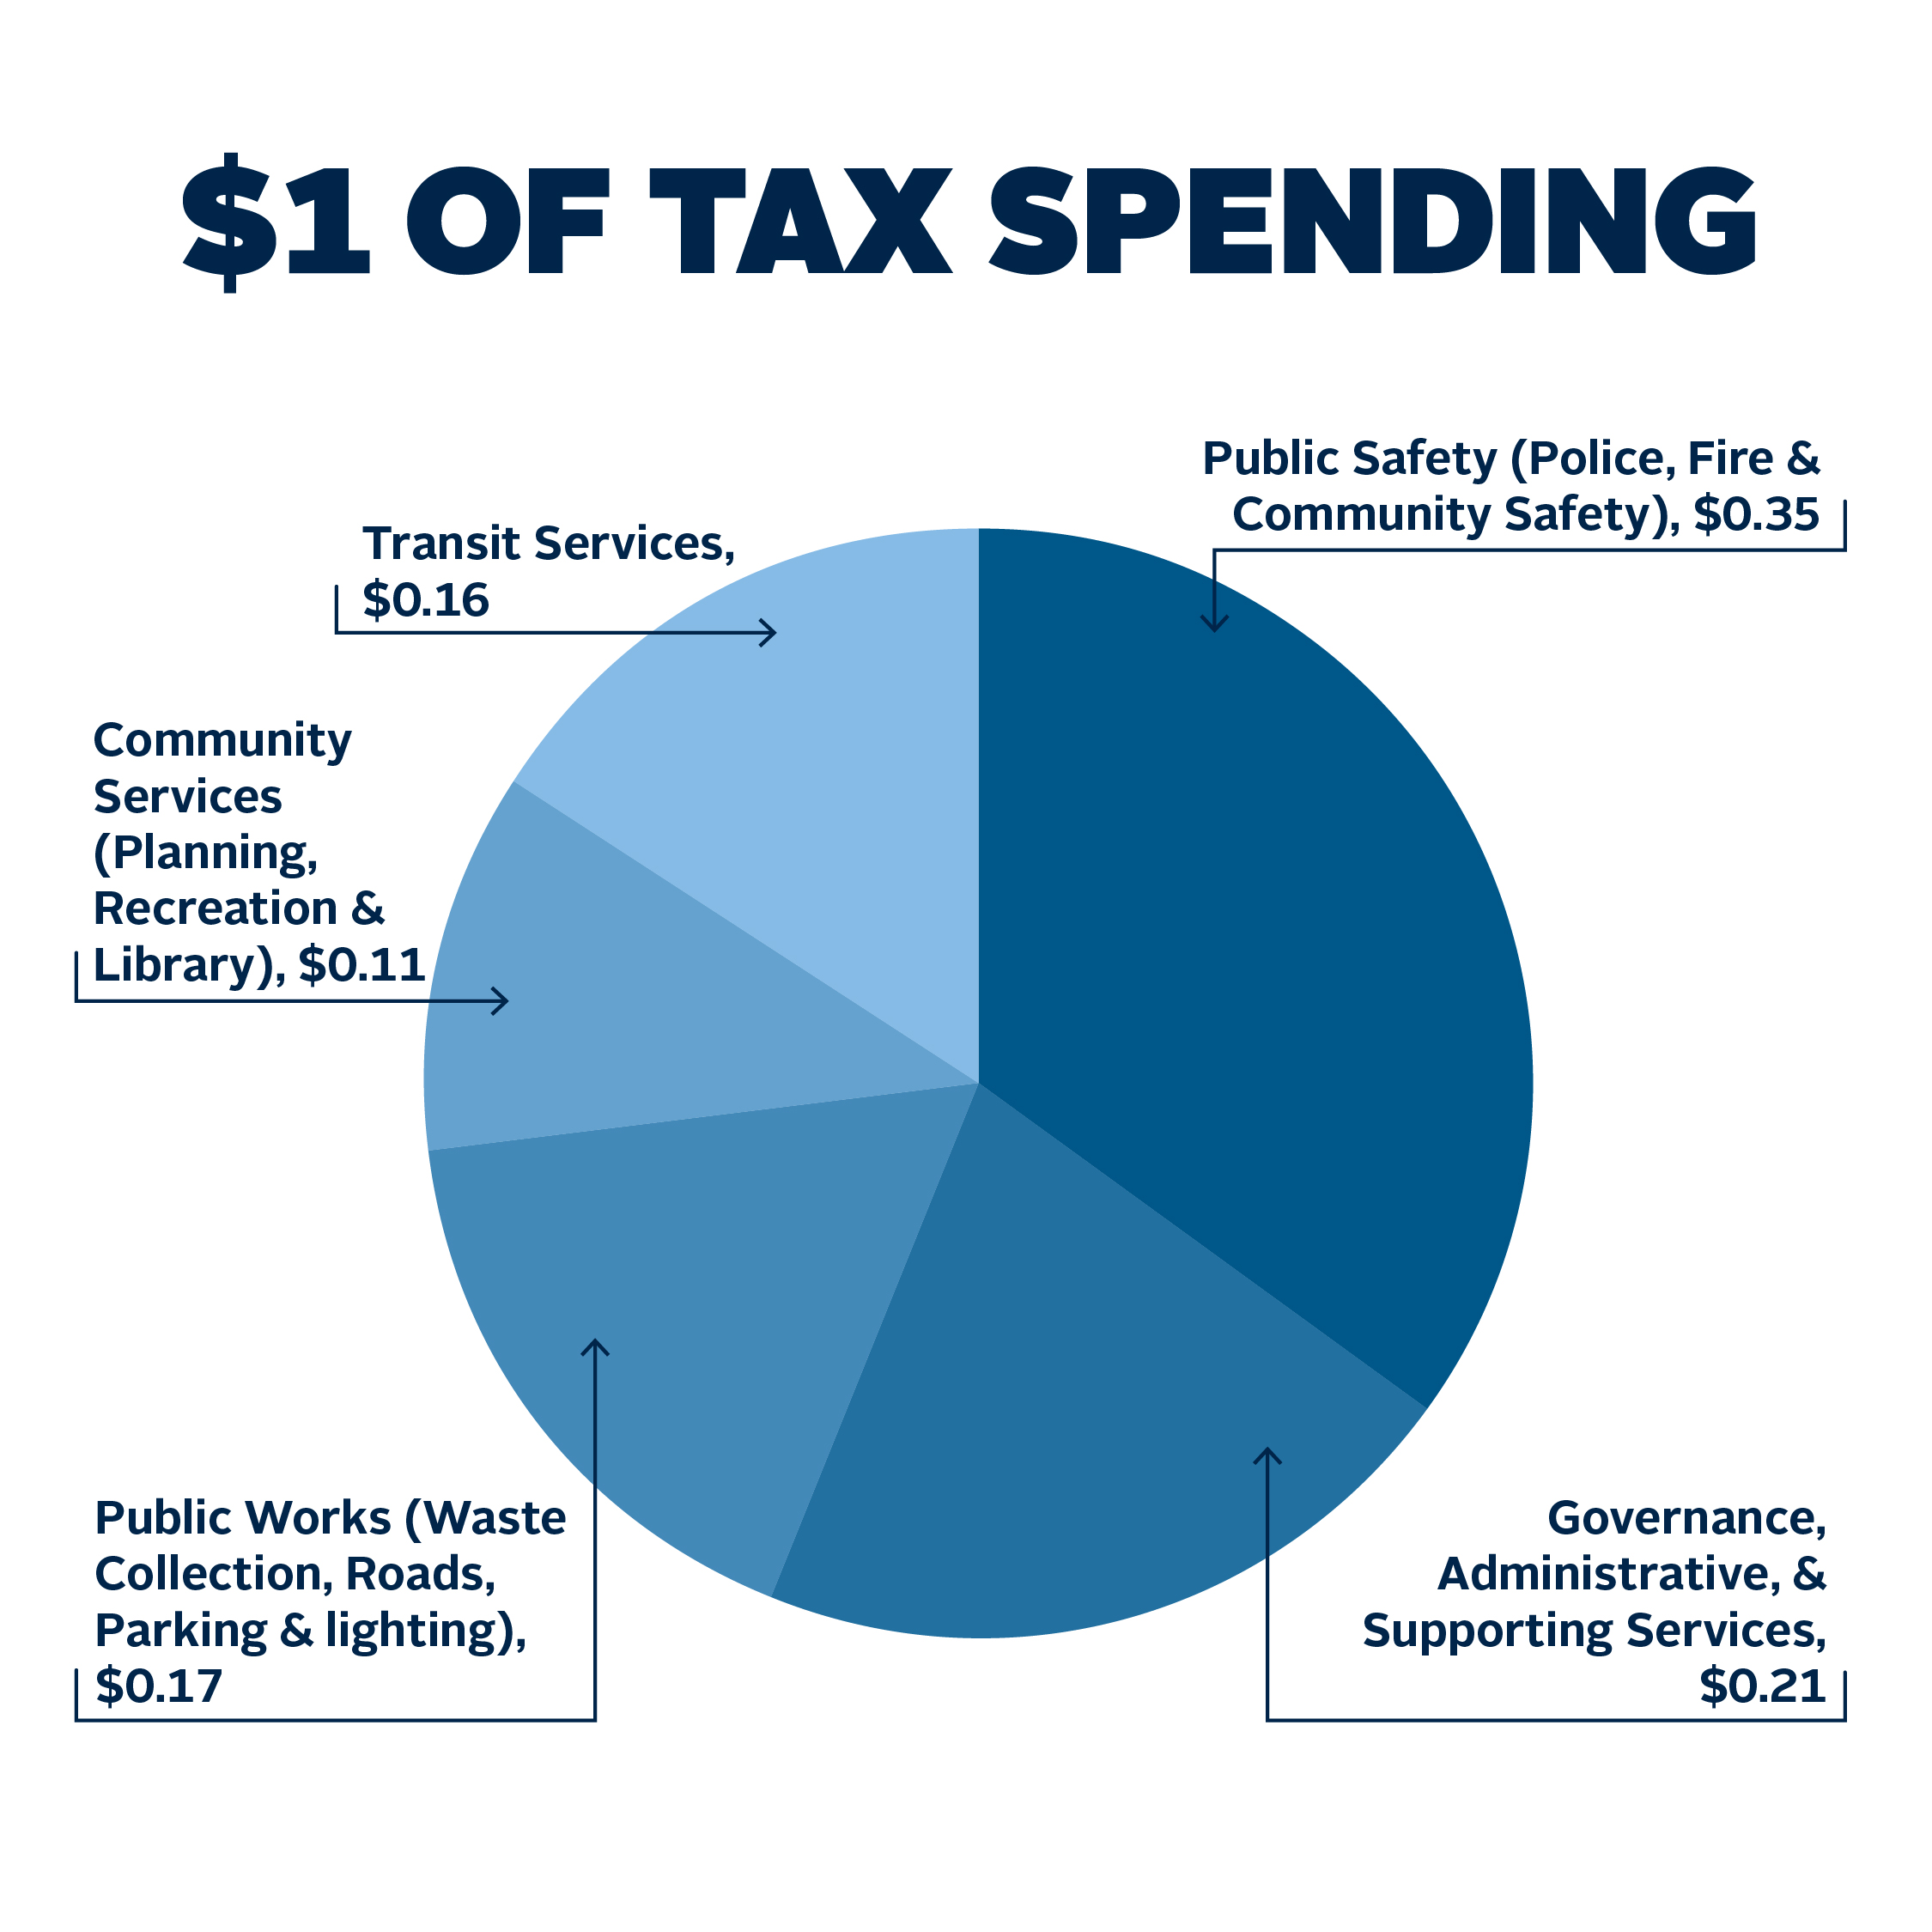 A pie chart demonstrating $1 of tax spending, split across Transit ($0.16), Public Safety ($0.35), Community Services ($0.11), Public Works ($0.17) and Administration ($0.21). 